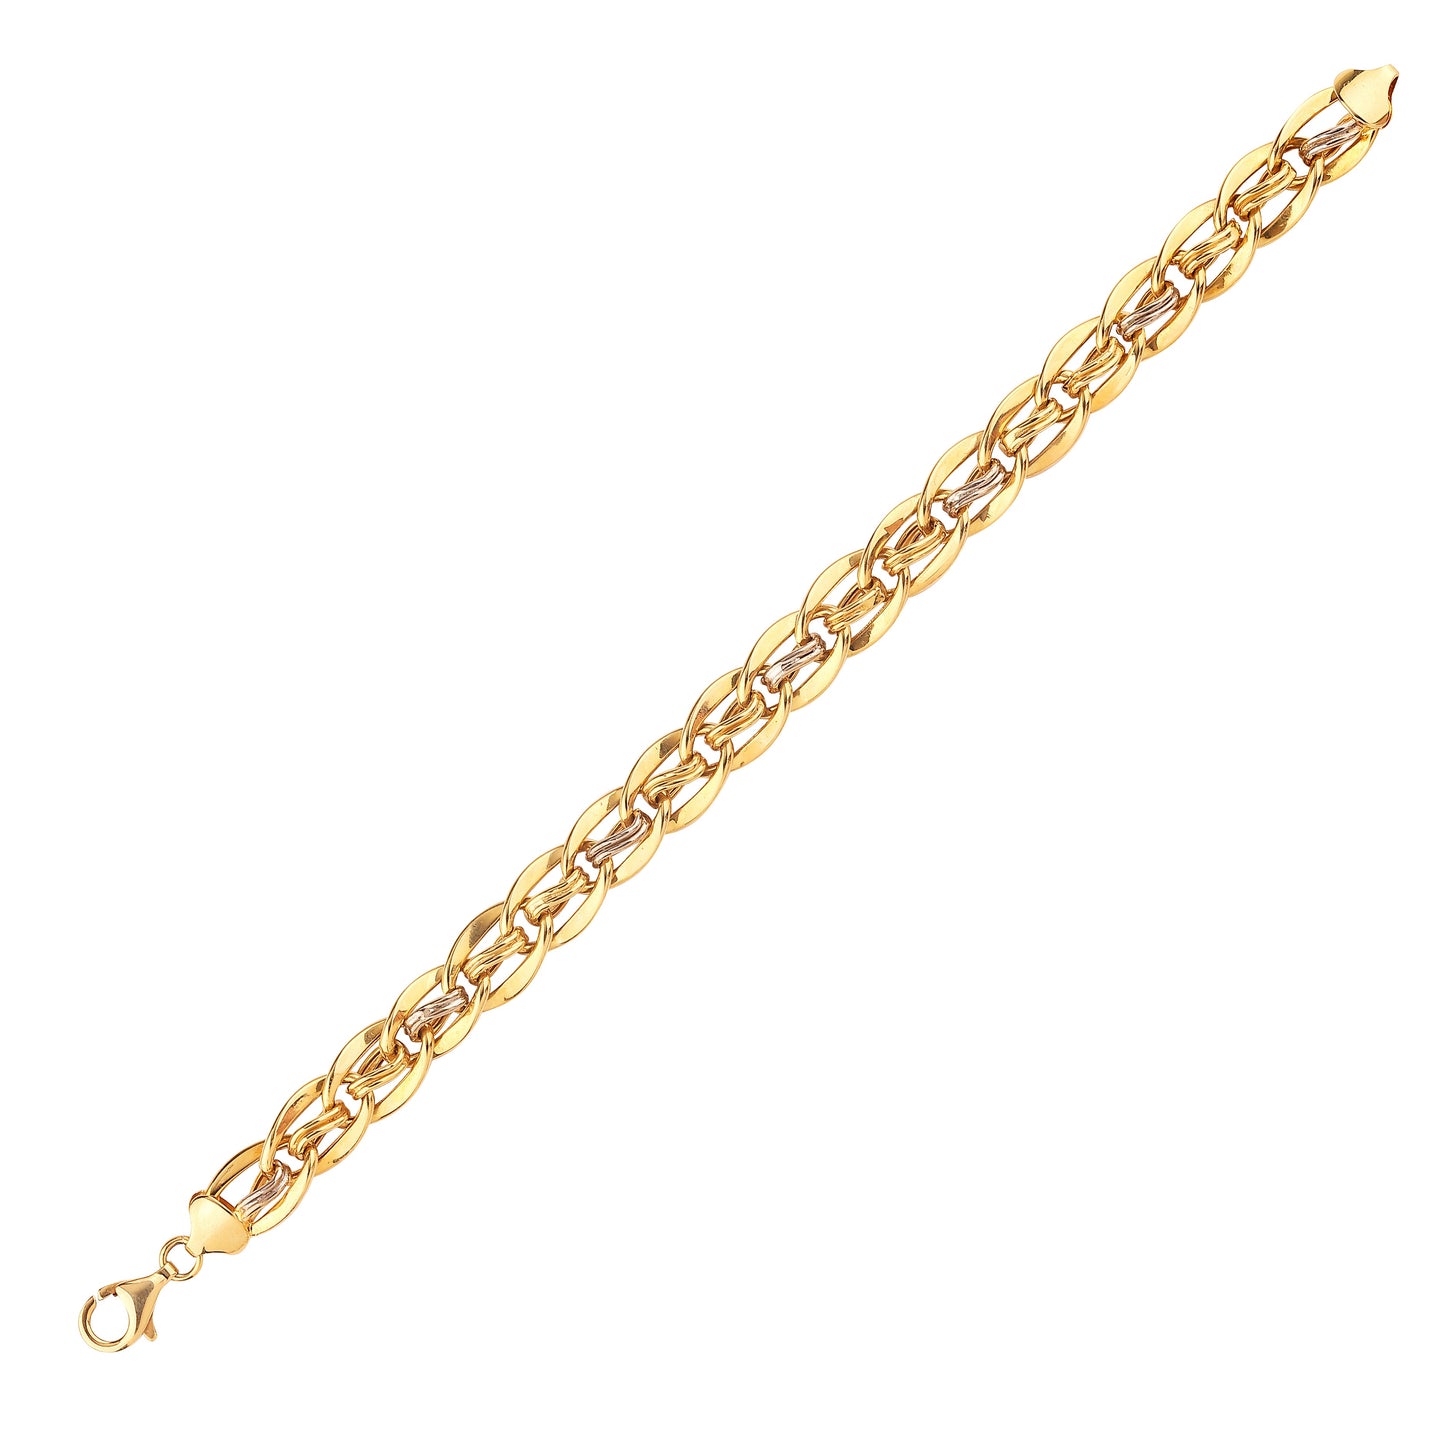 Gold-plated Intertwined Chain Bracelet